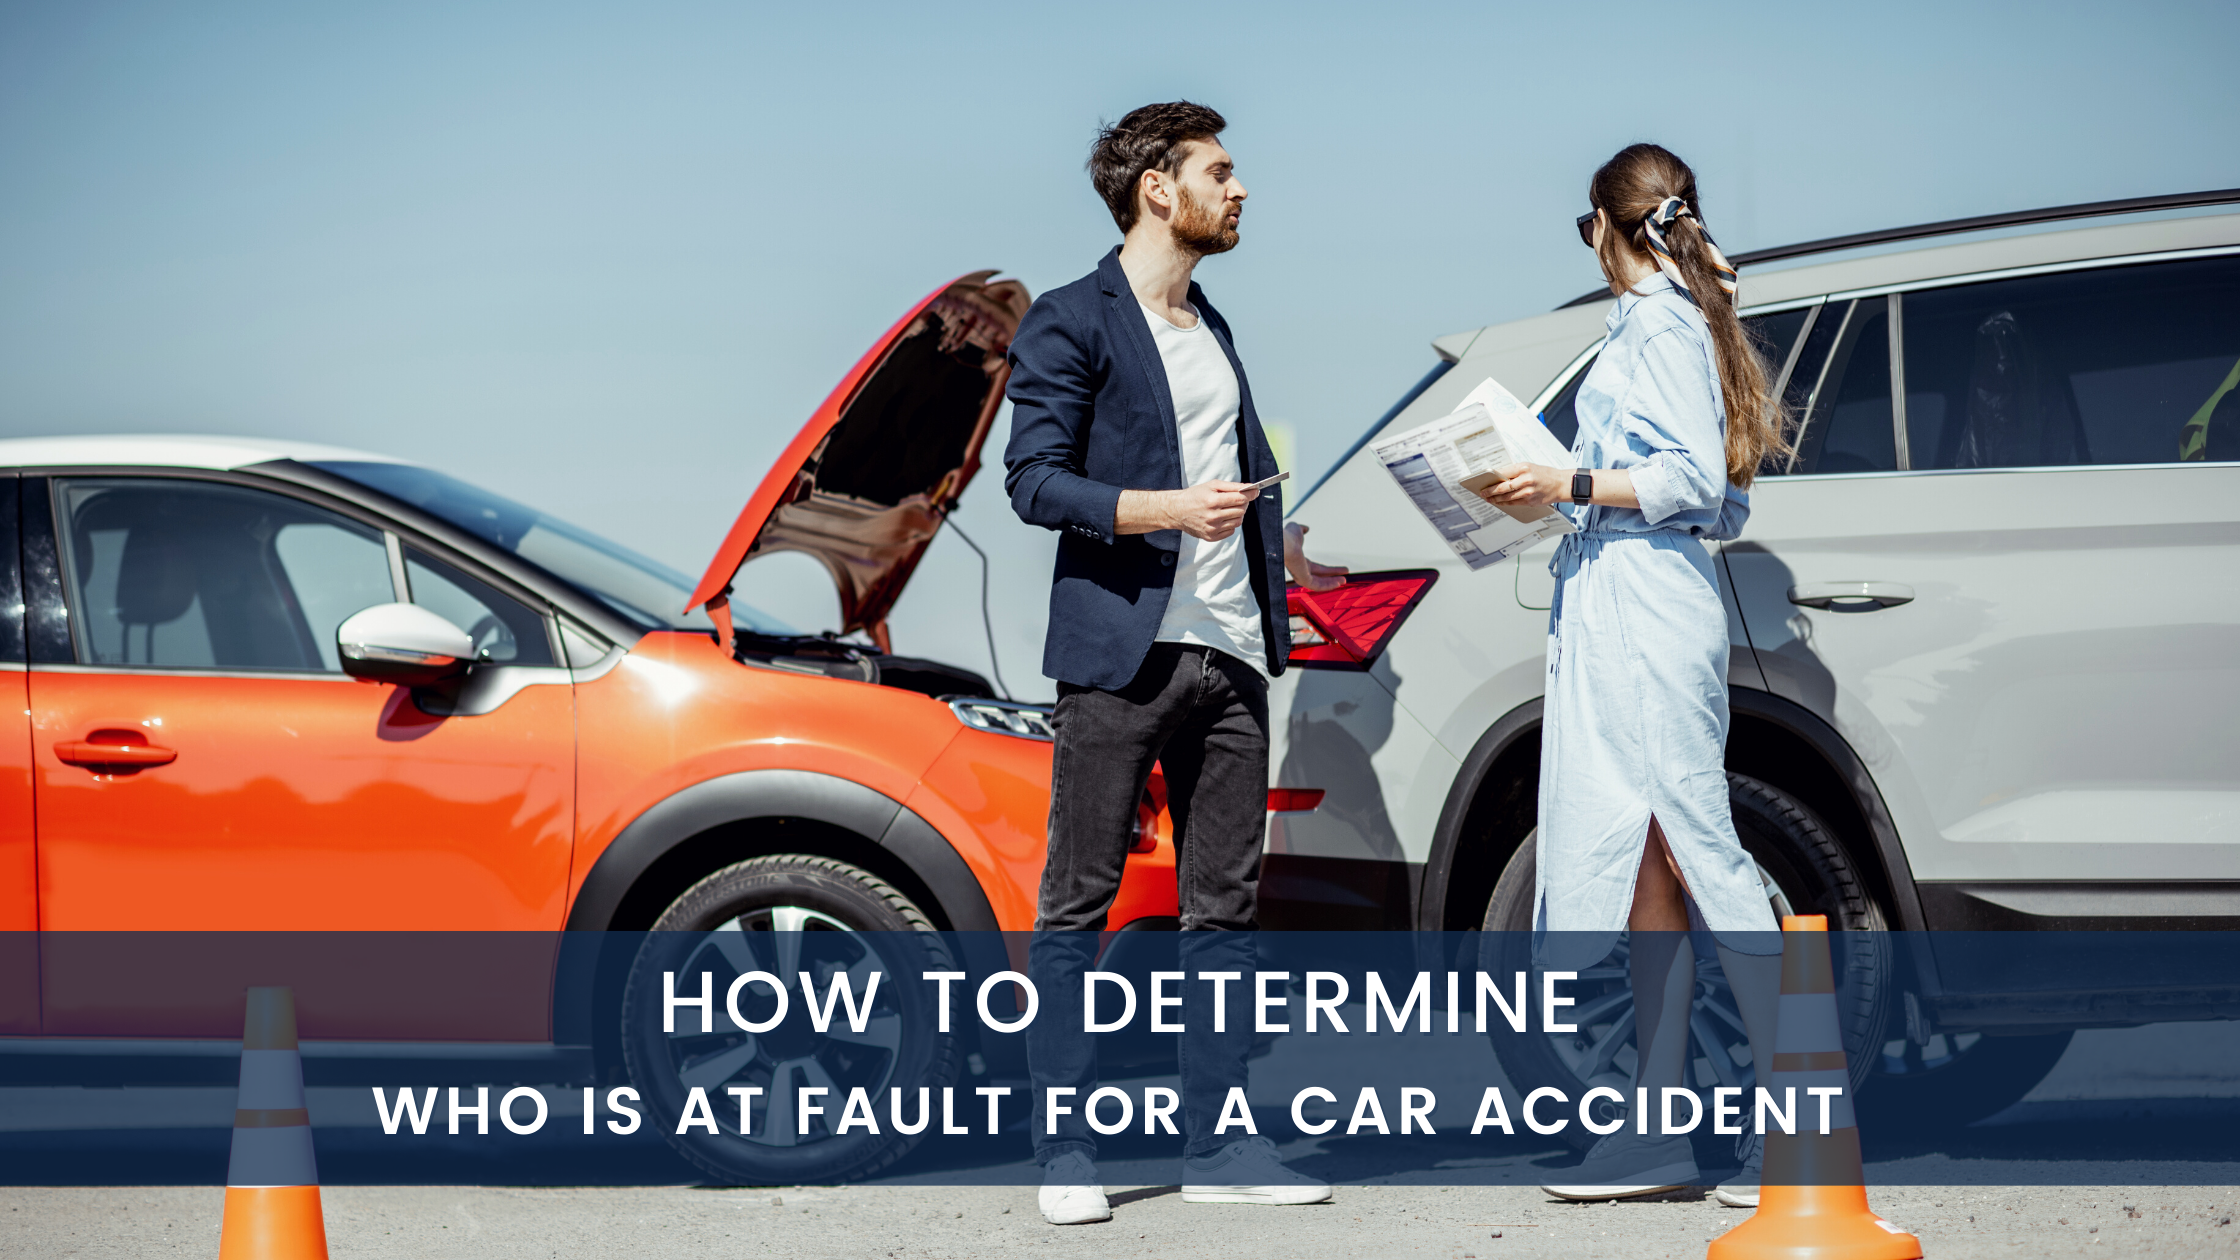 car accident lawyer explains who is at fault in an accident